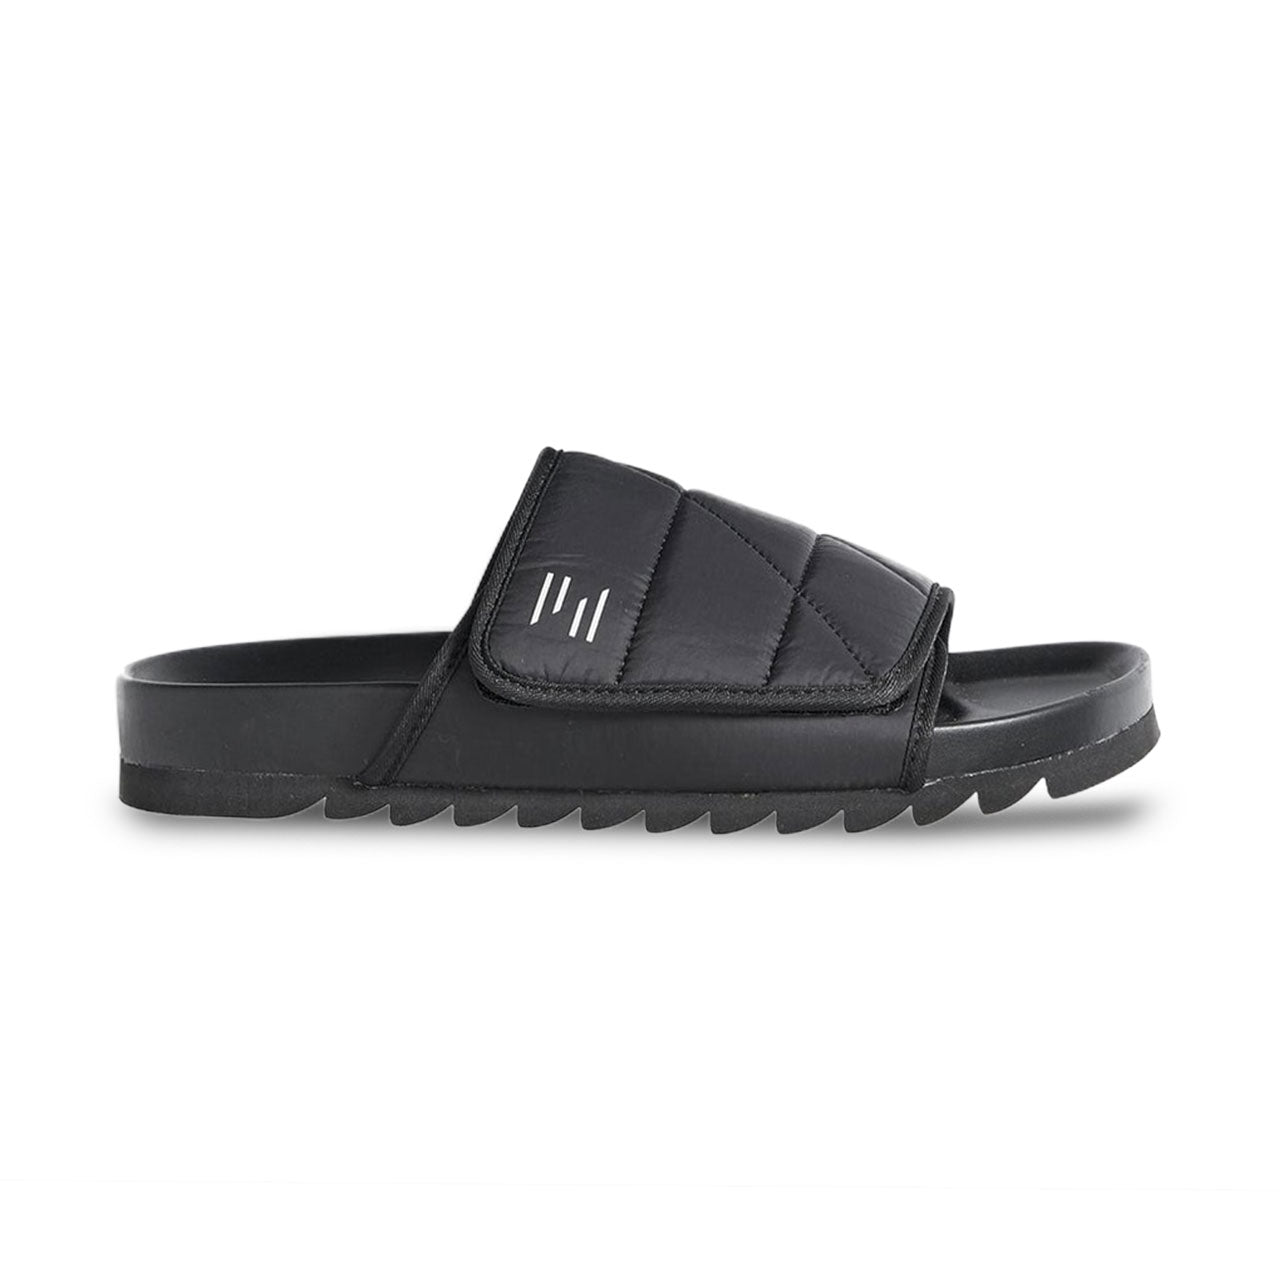 Holden Puffy Slides | Uncrate, #Holden #Puffy #Slides #Uncrate